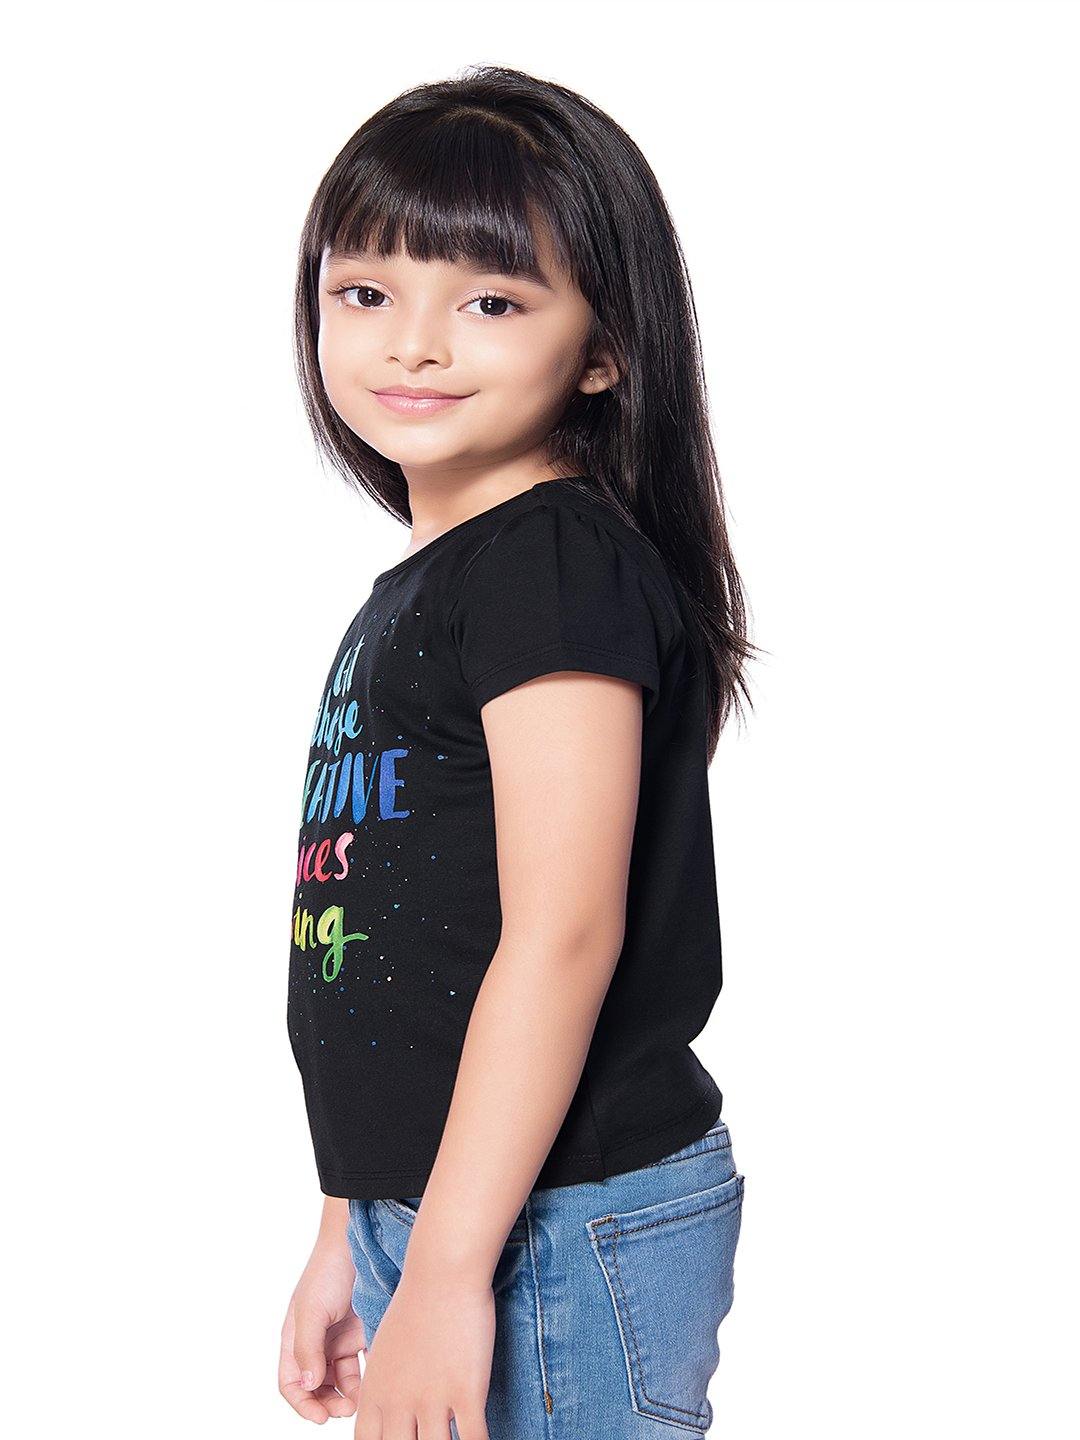 Tiny Baby Black Colored Top - T-105 Black - TINY BABY INDIA shop.tinybaby.in